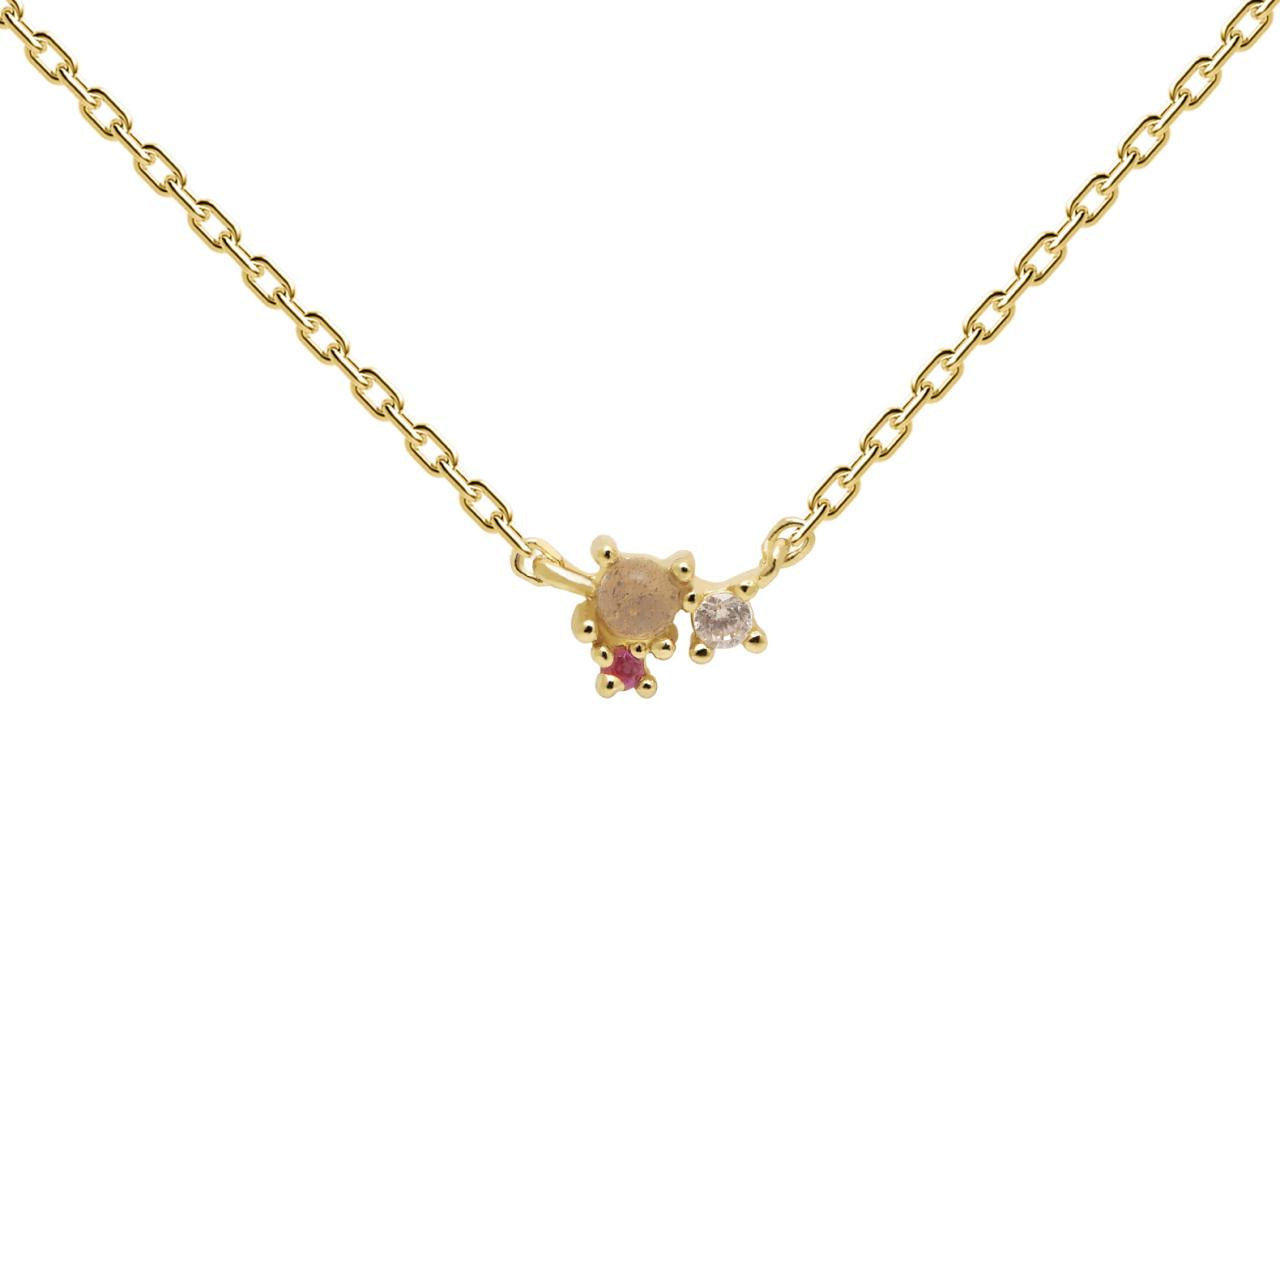 PD Paola 18ct Gold Plated Atelier Rose Blush Necklace 55cm